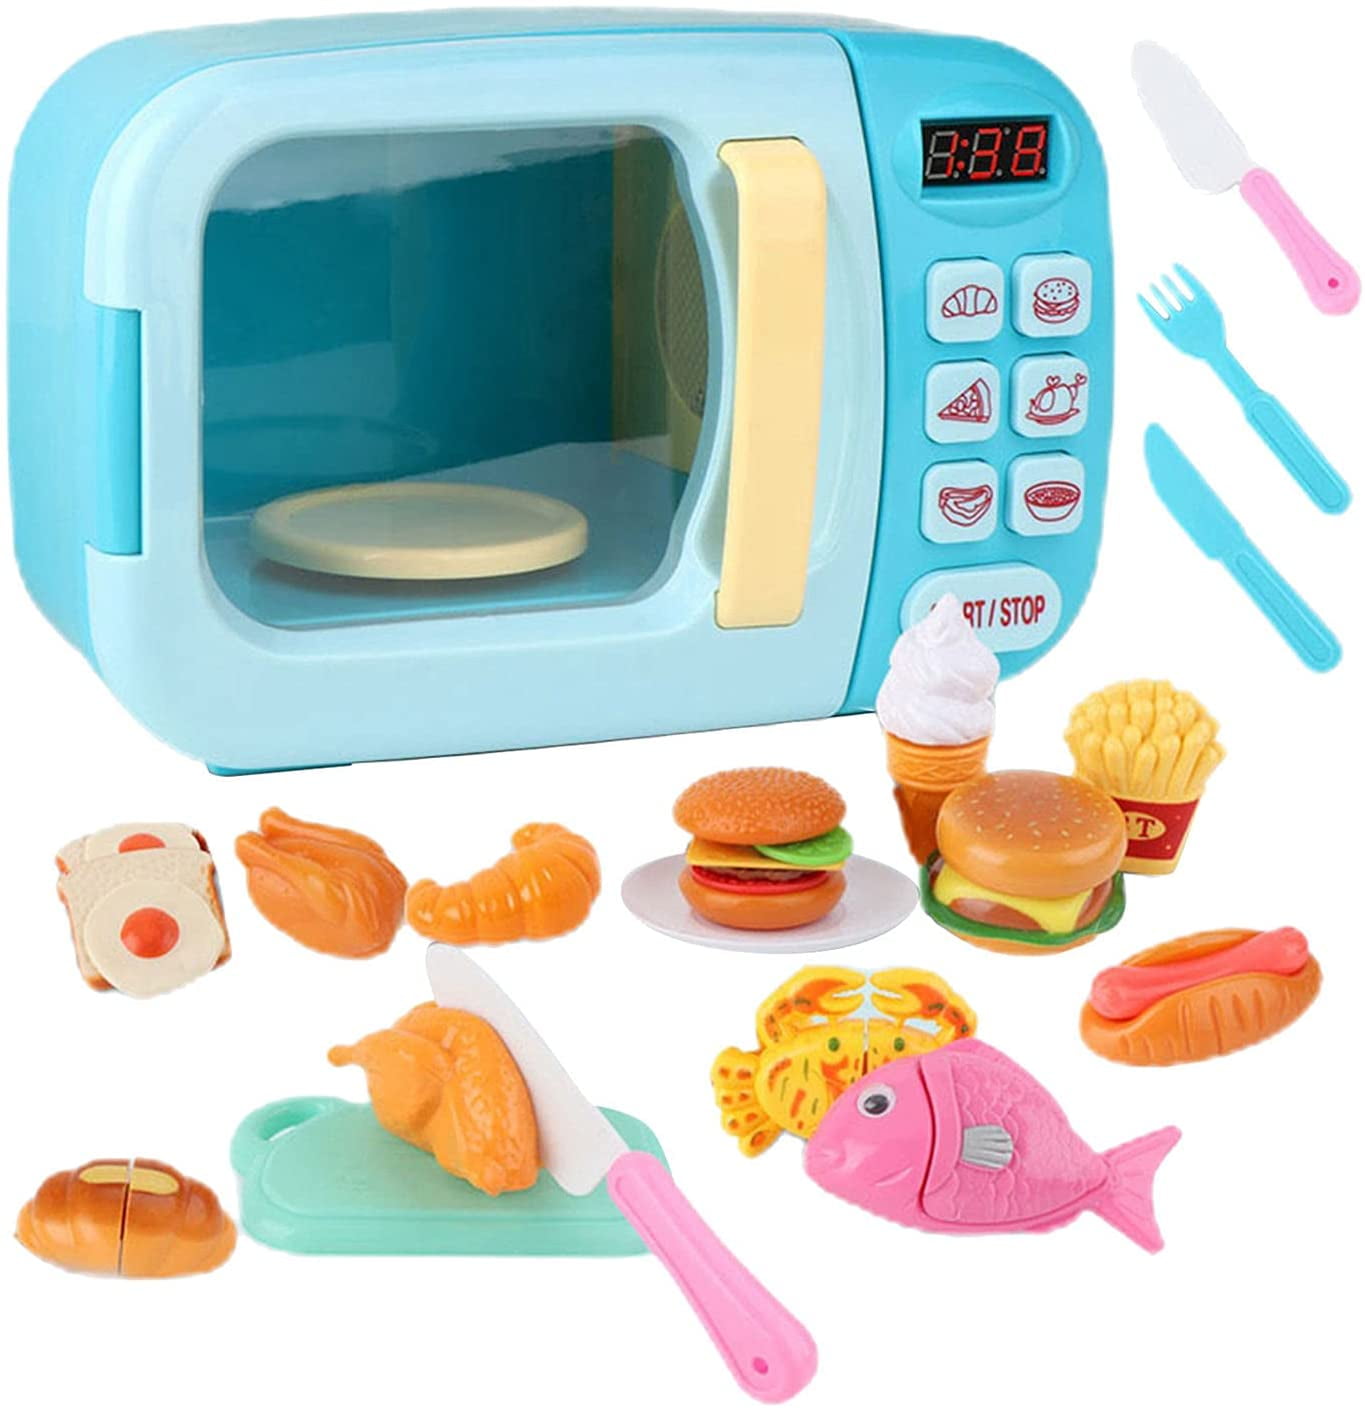 Kids Cooking Role Play Toy Kitchen Set Microwave Kettle Toaster Children's Gift 